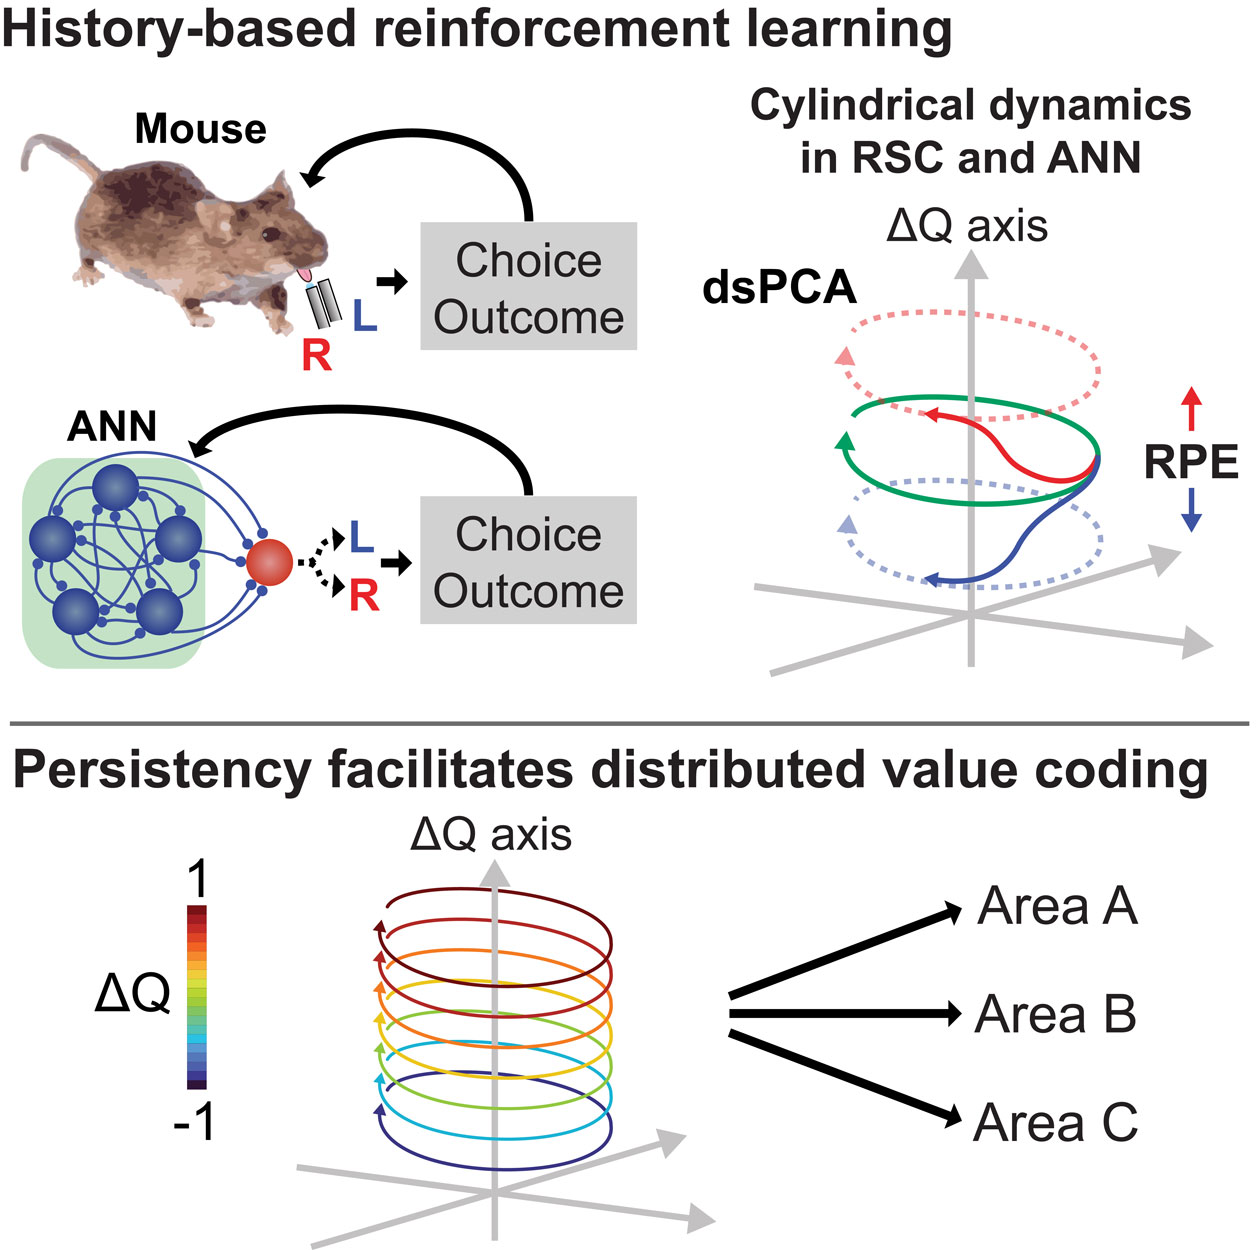 Graphic abstract showing the experiments they performed to confirm history-based reinforcement learning and persistency facilitates distributed value coding